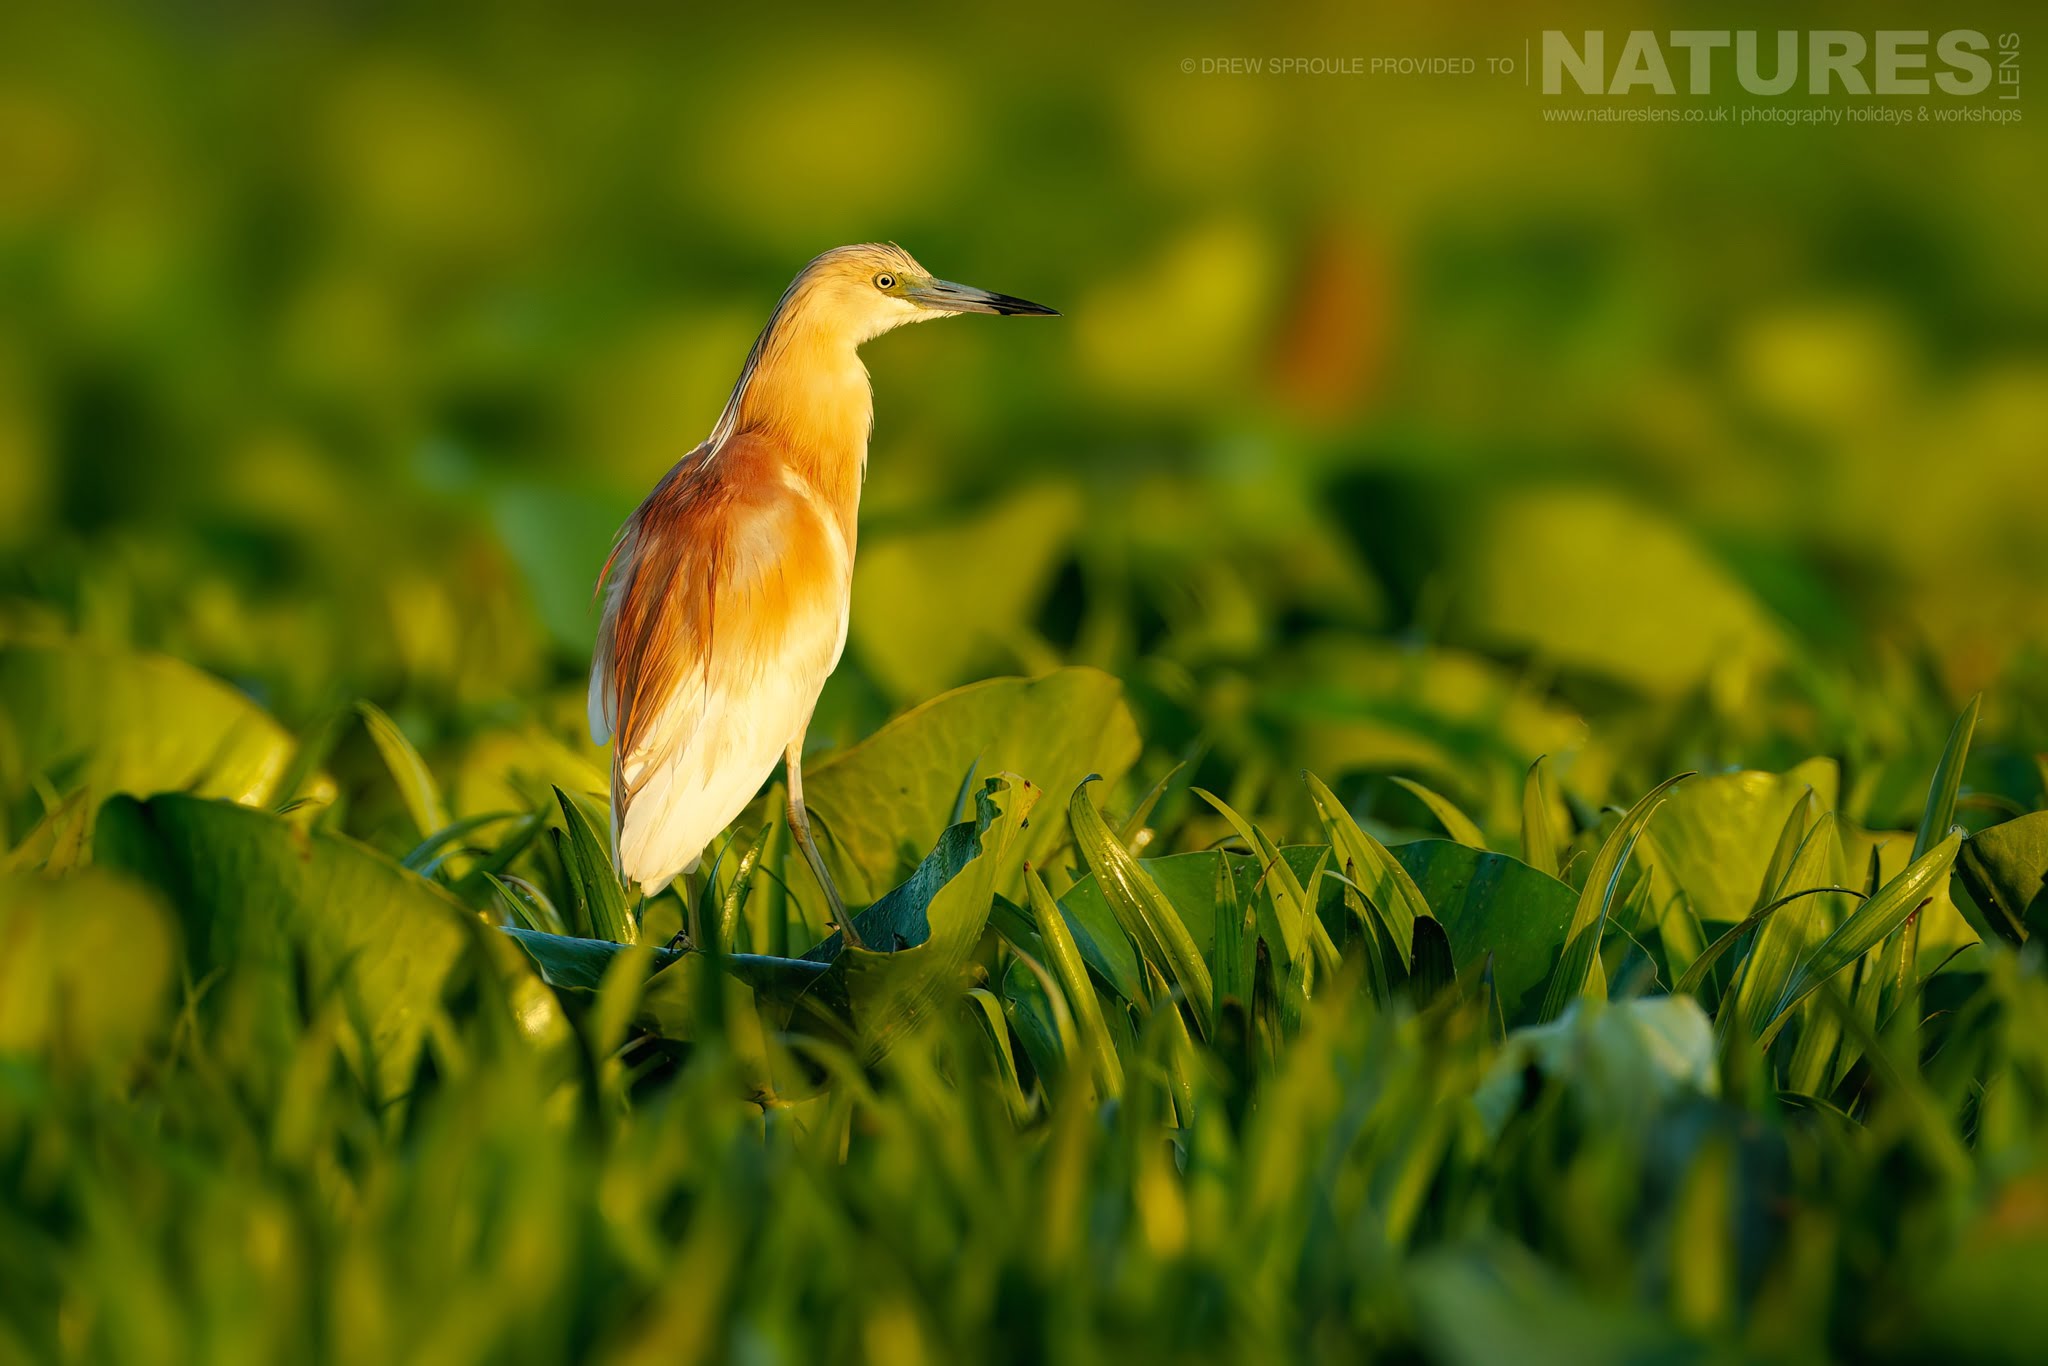 A Peaceful Portrait Of A Squacco Heron Typical Of The Kind Of Image You Will Capture During The Birdlife Of The Danube Delta Photography Trip